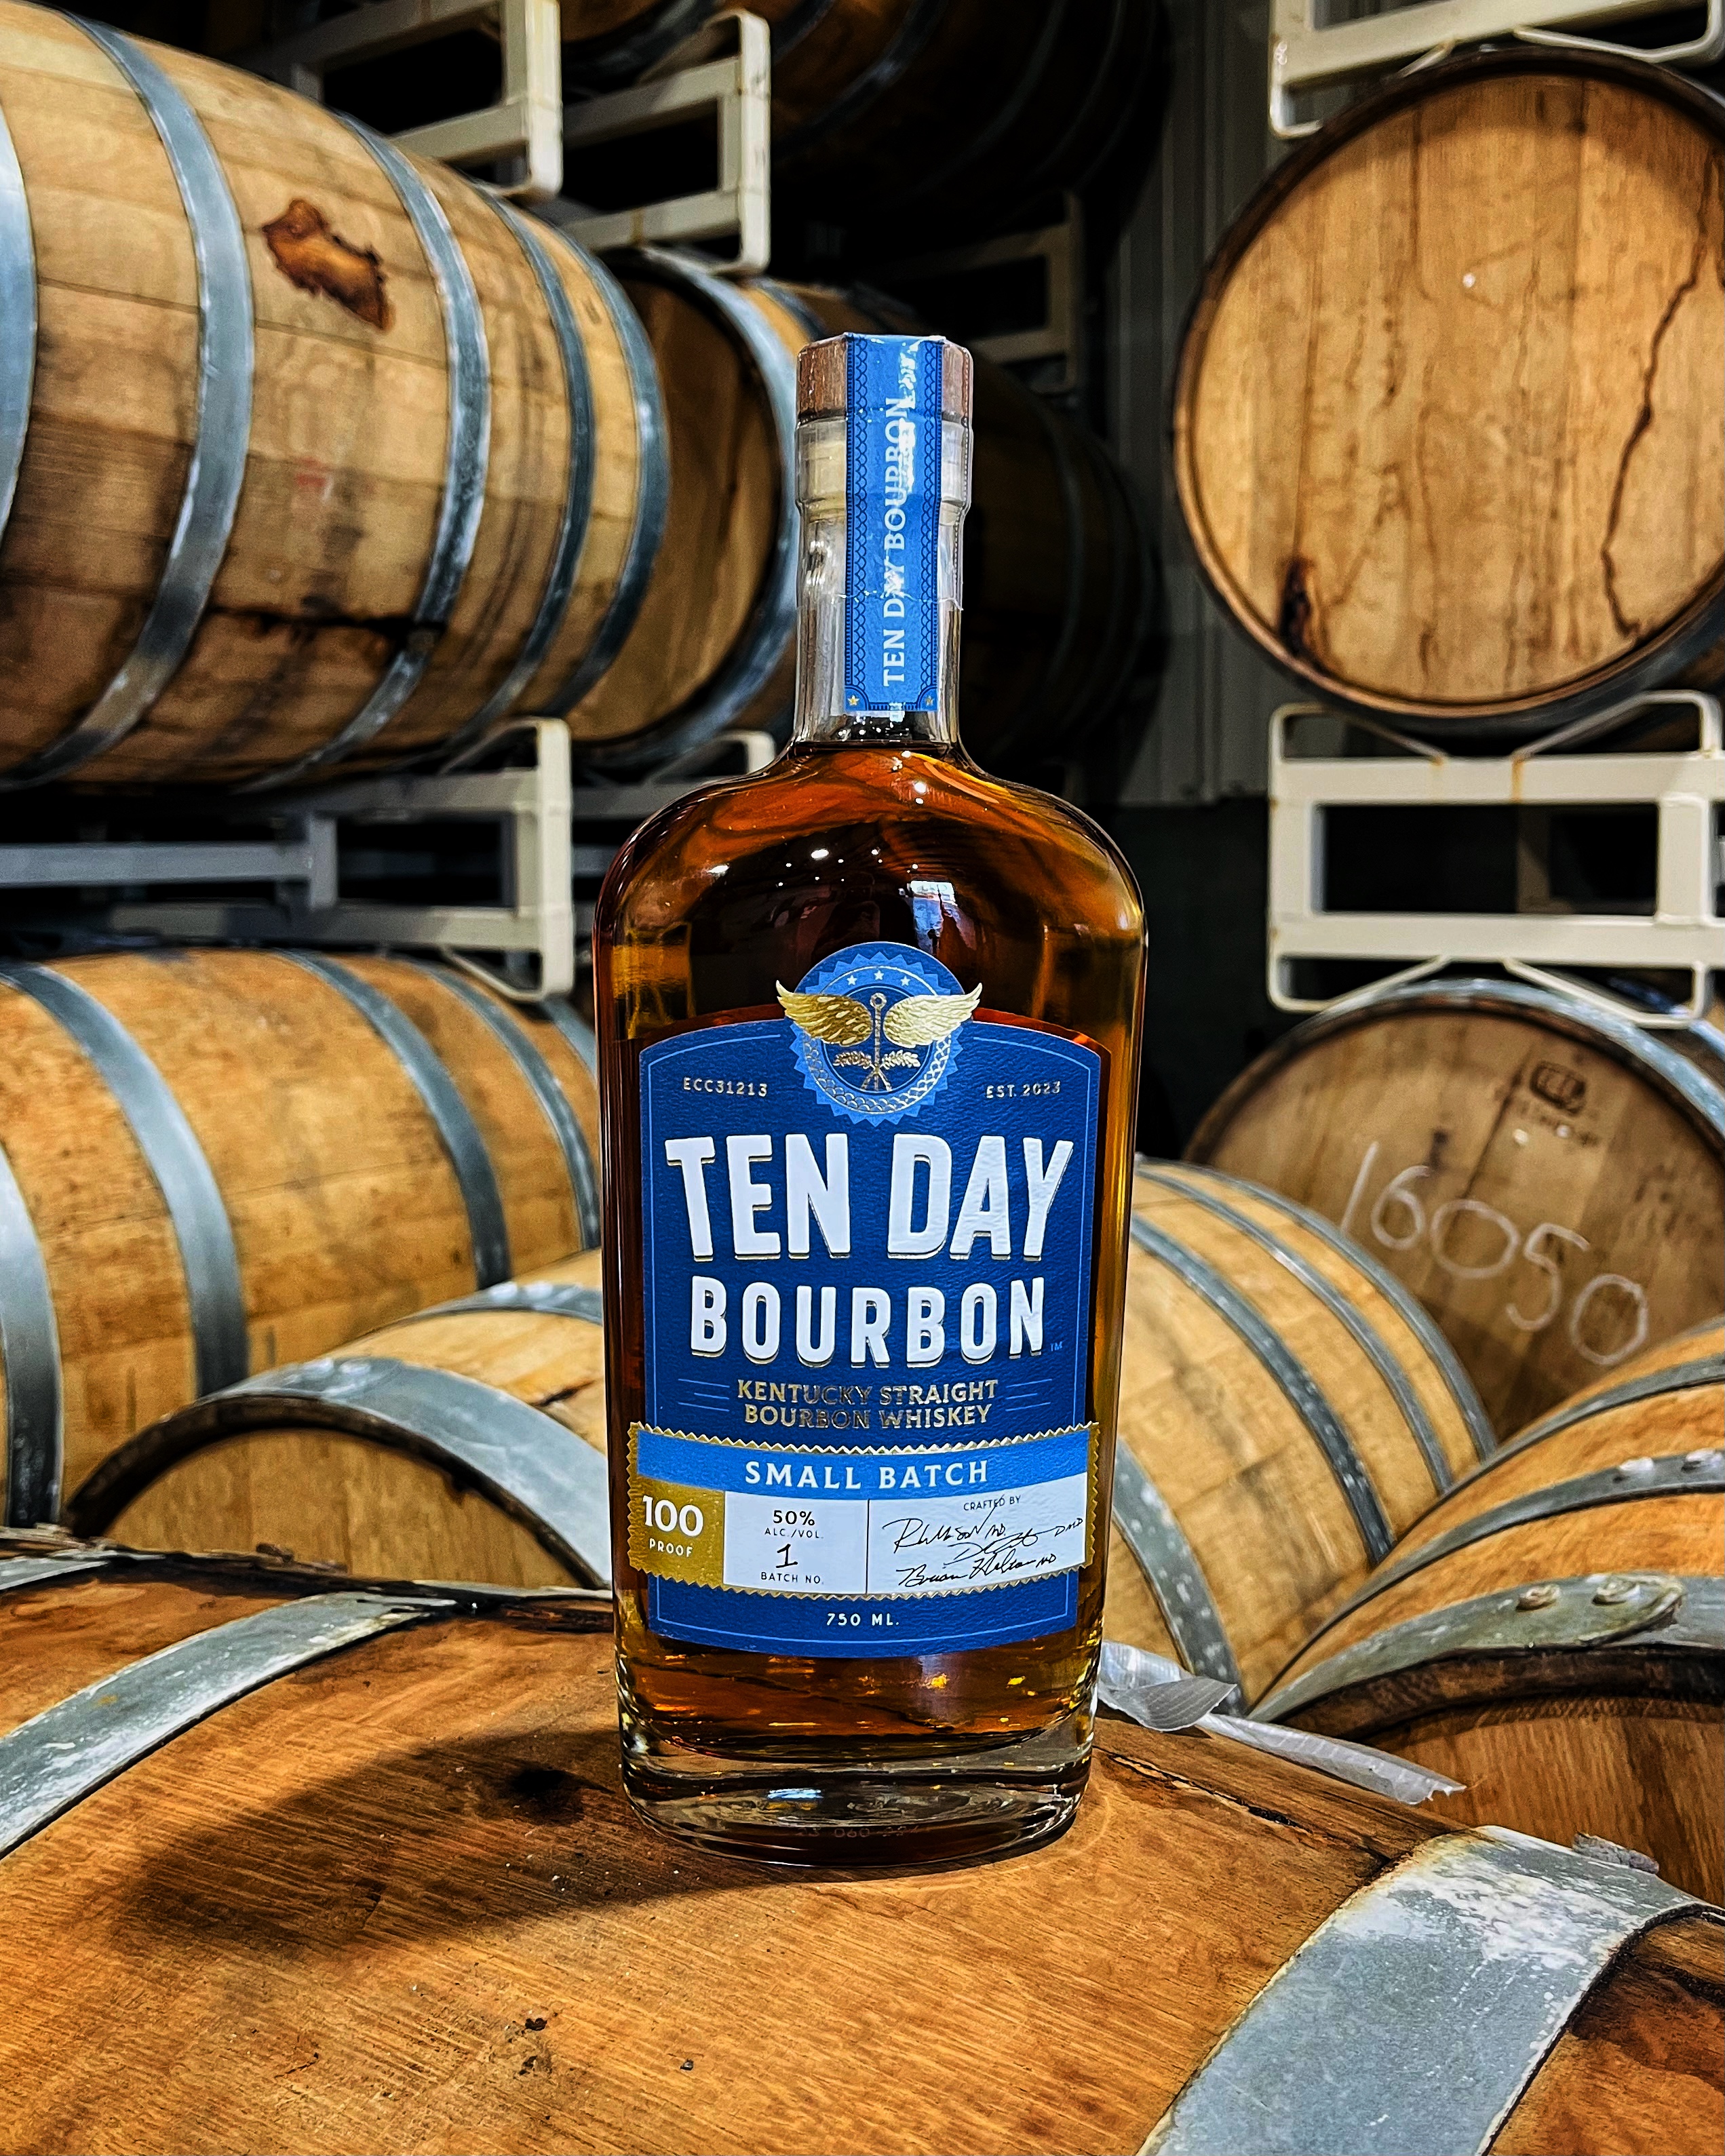 A Tribute to Prohibition Era Doctors: “Ten Day Bourbon” Reviewed